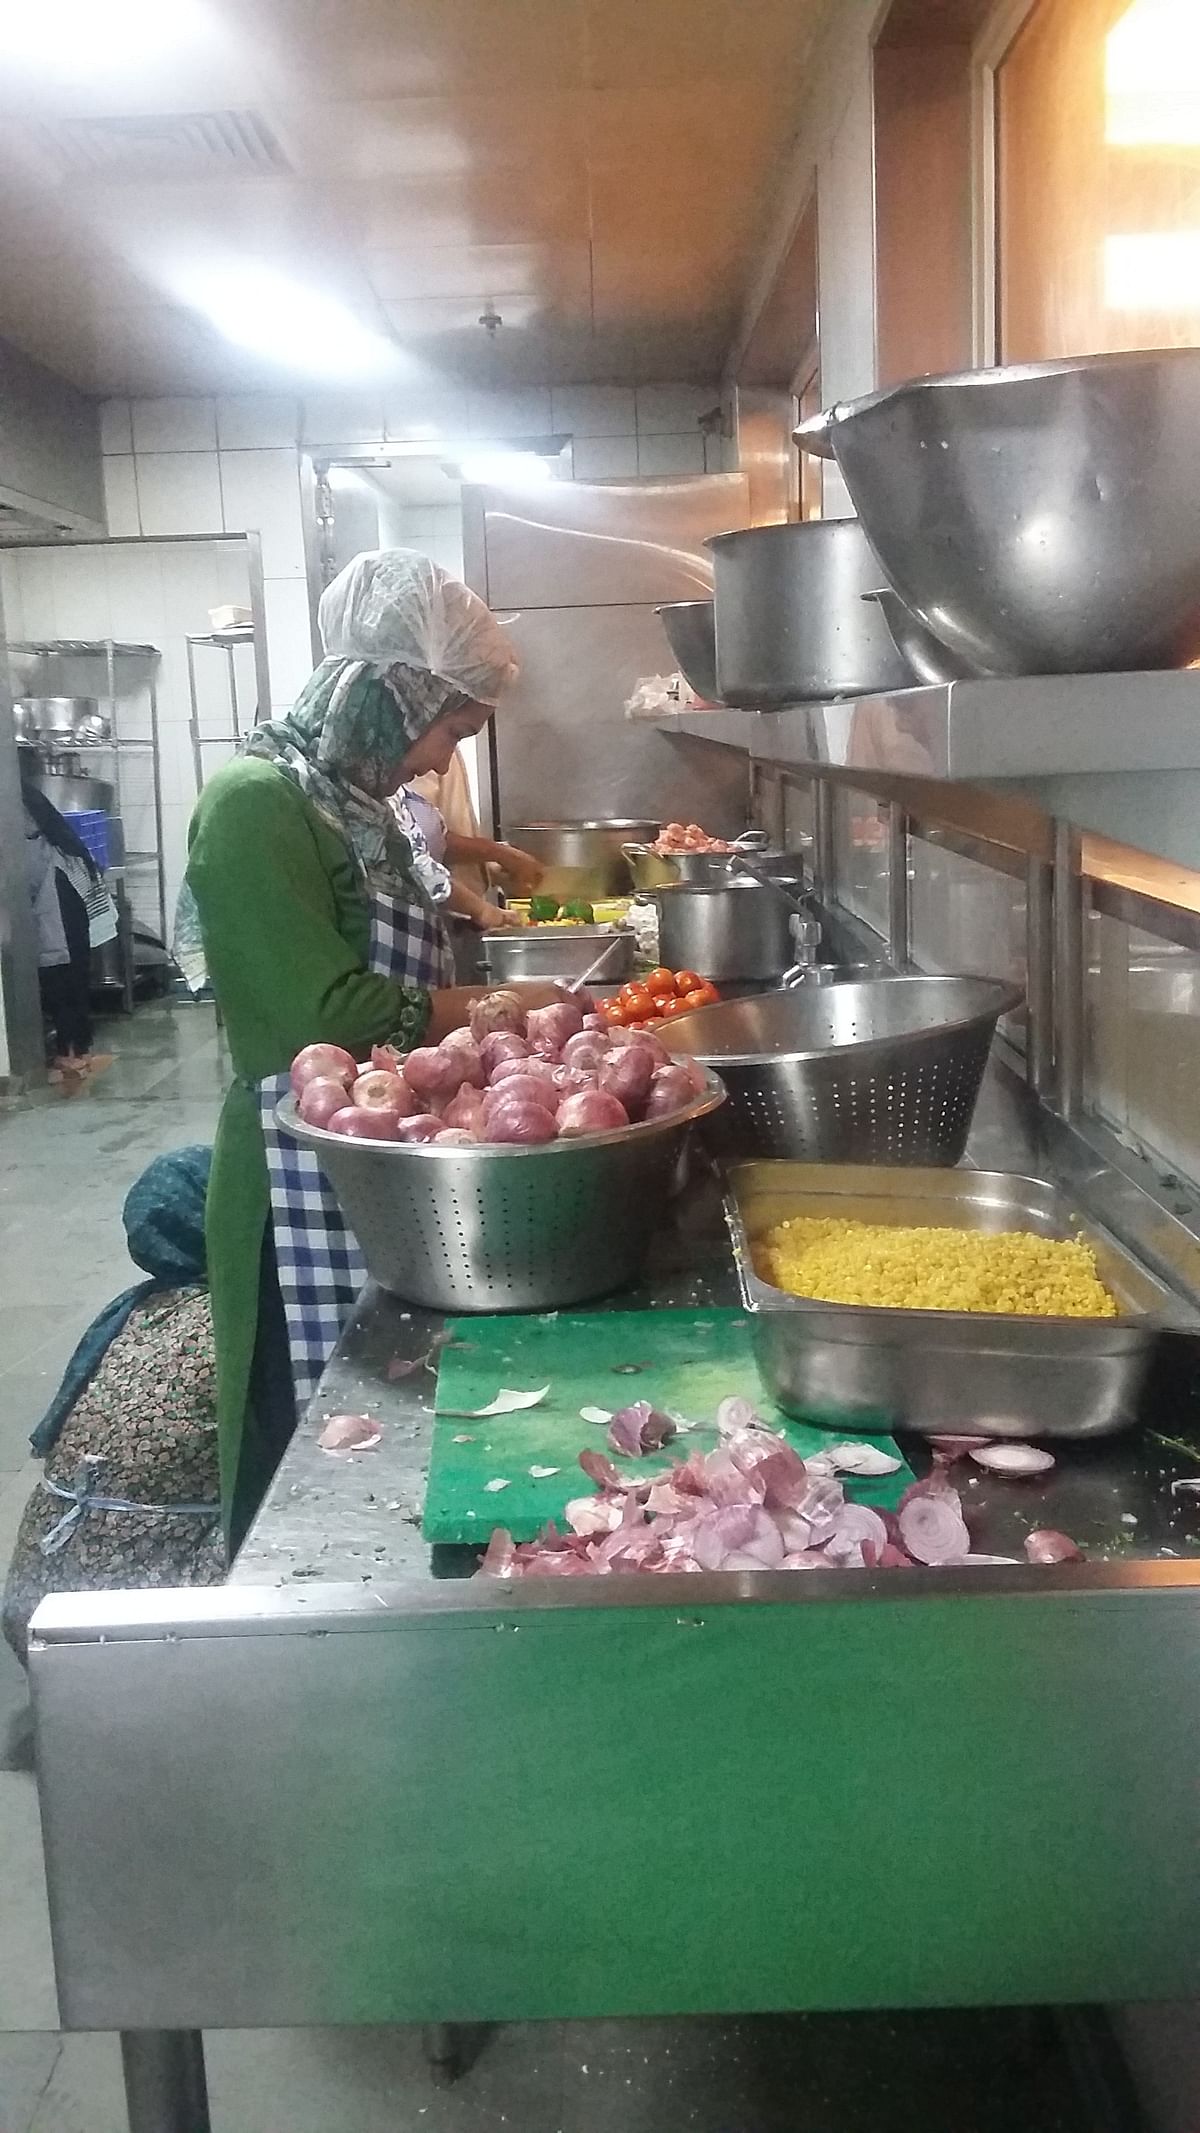 Far from the horrors of war back home, seven Afghan women refugees are serving up delicious fare in India.